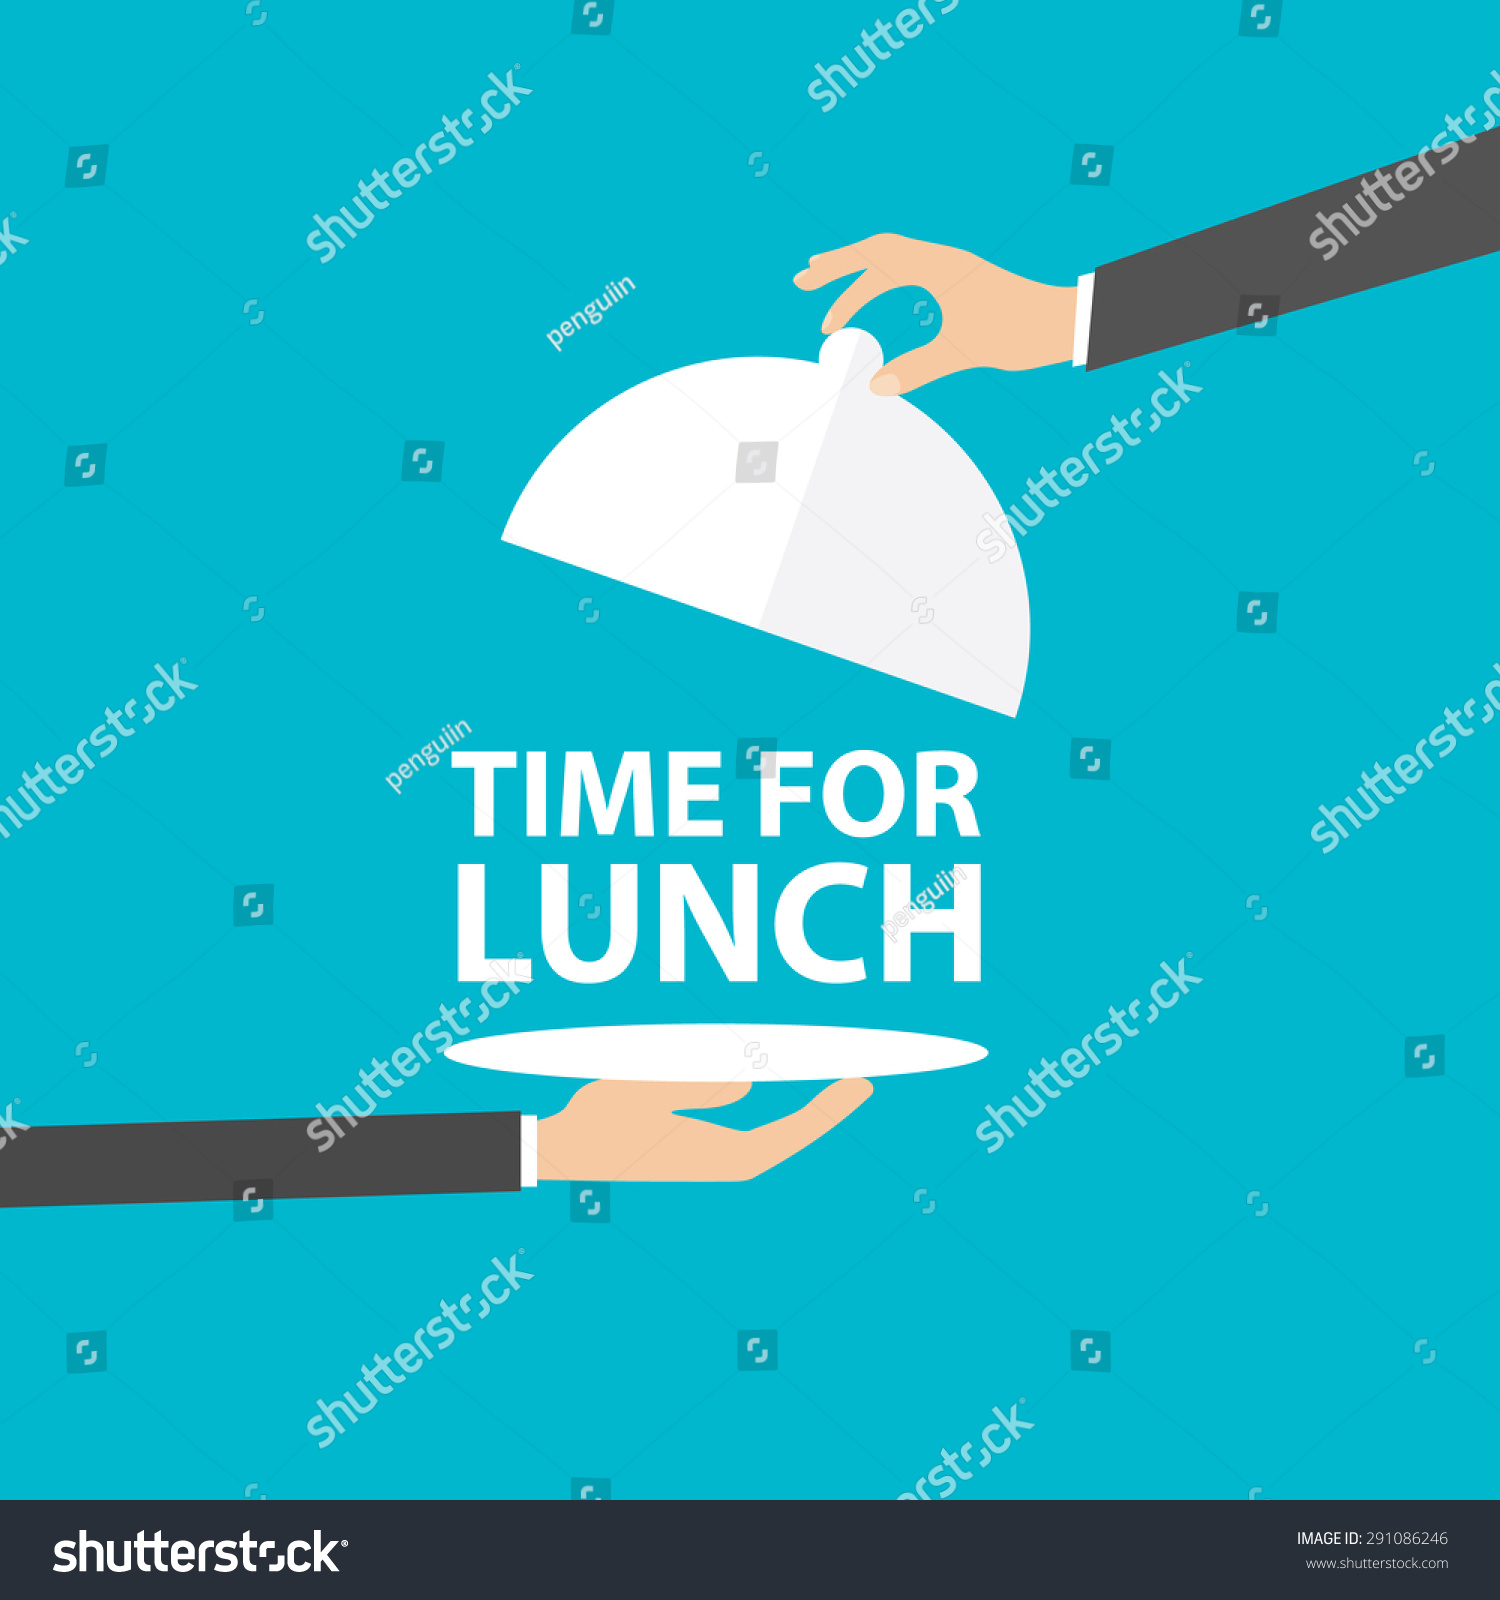 Time for lunch, vector